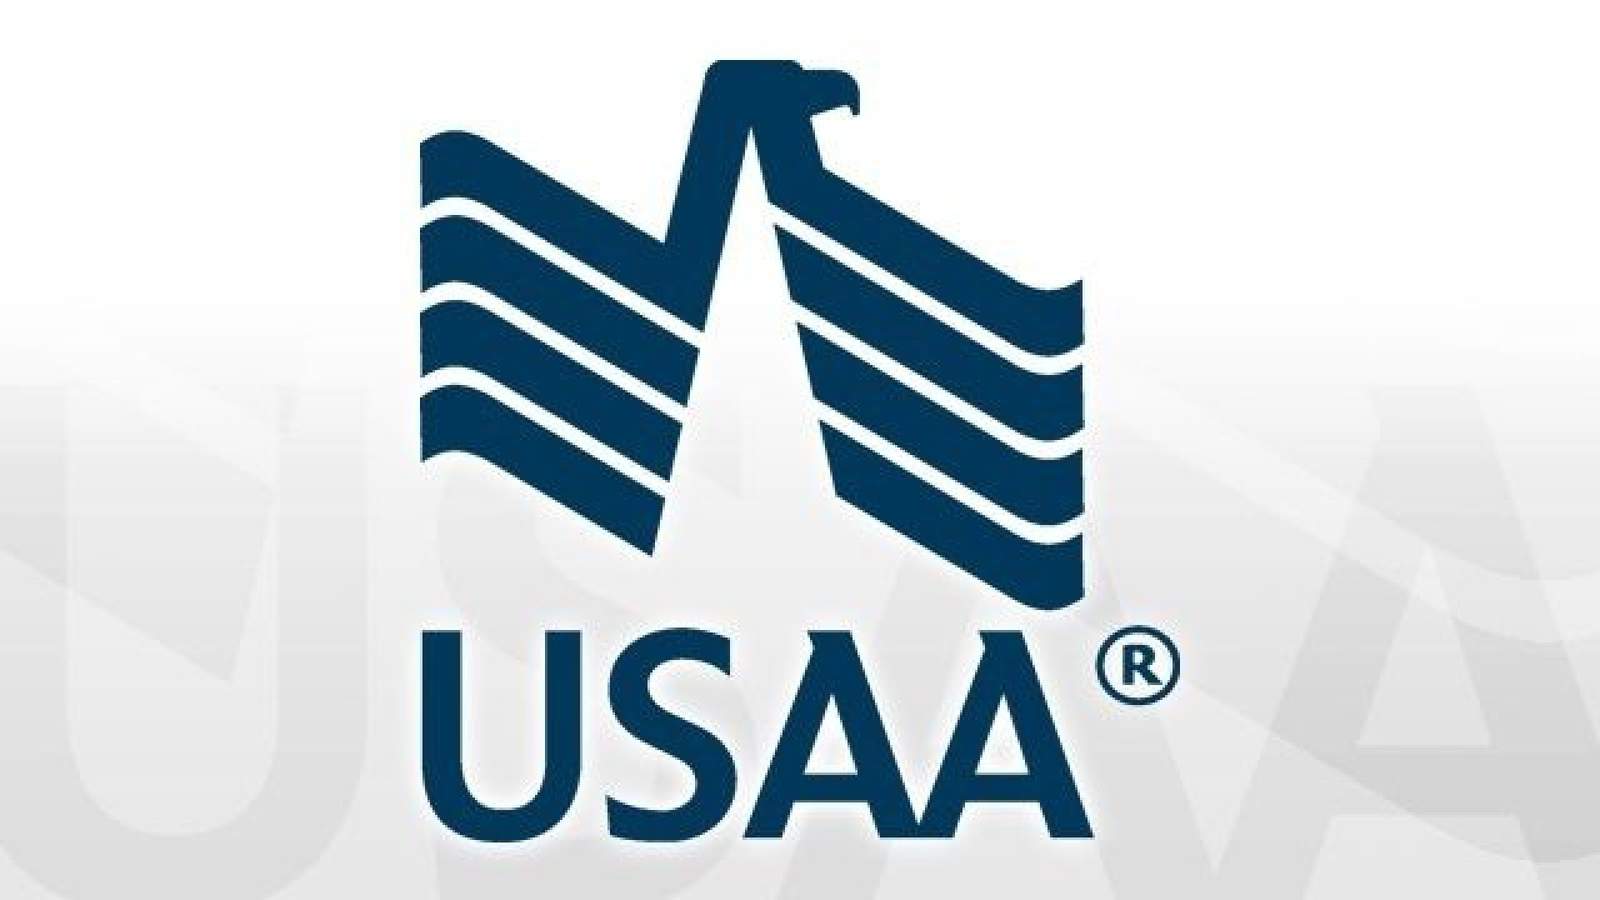 Federal government orders USAA to pay $85M civil penalty